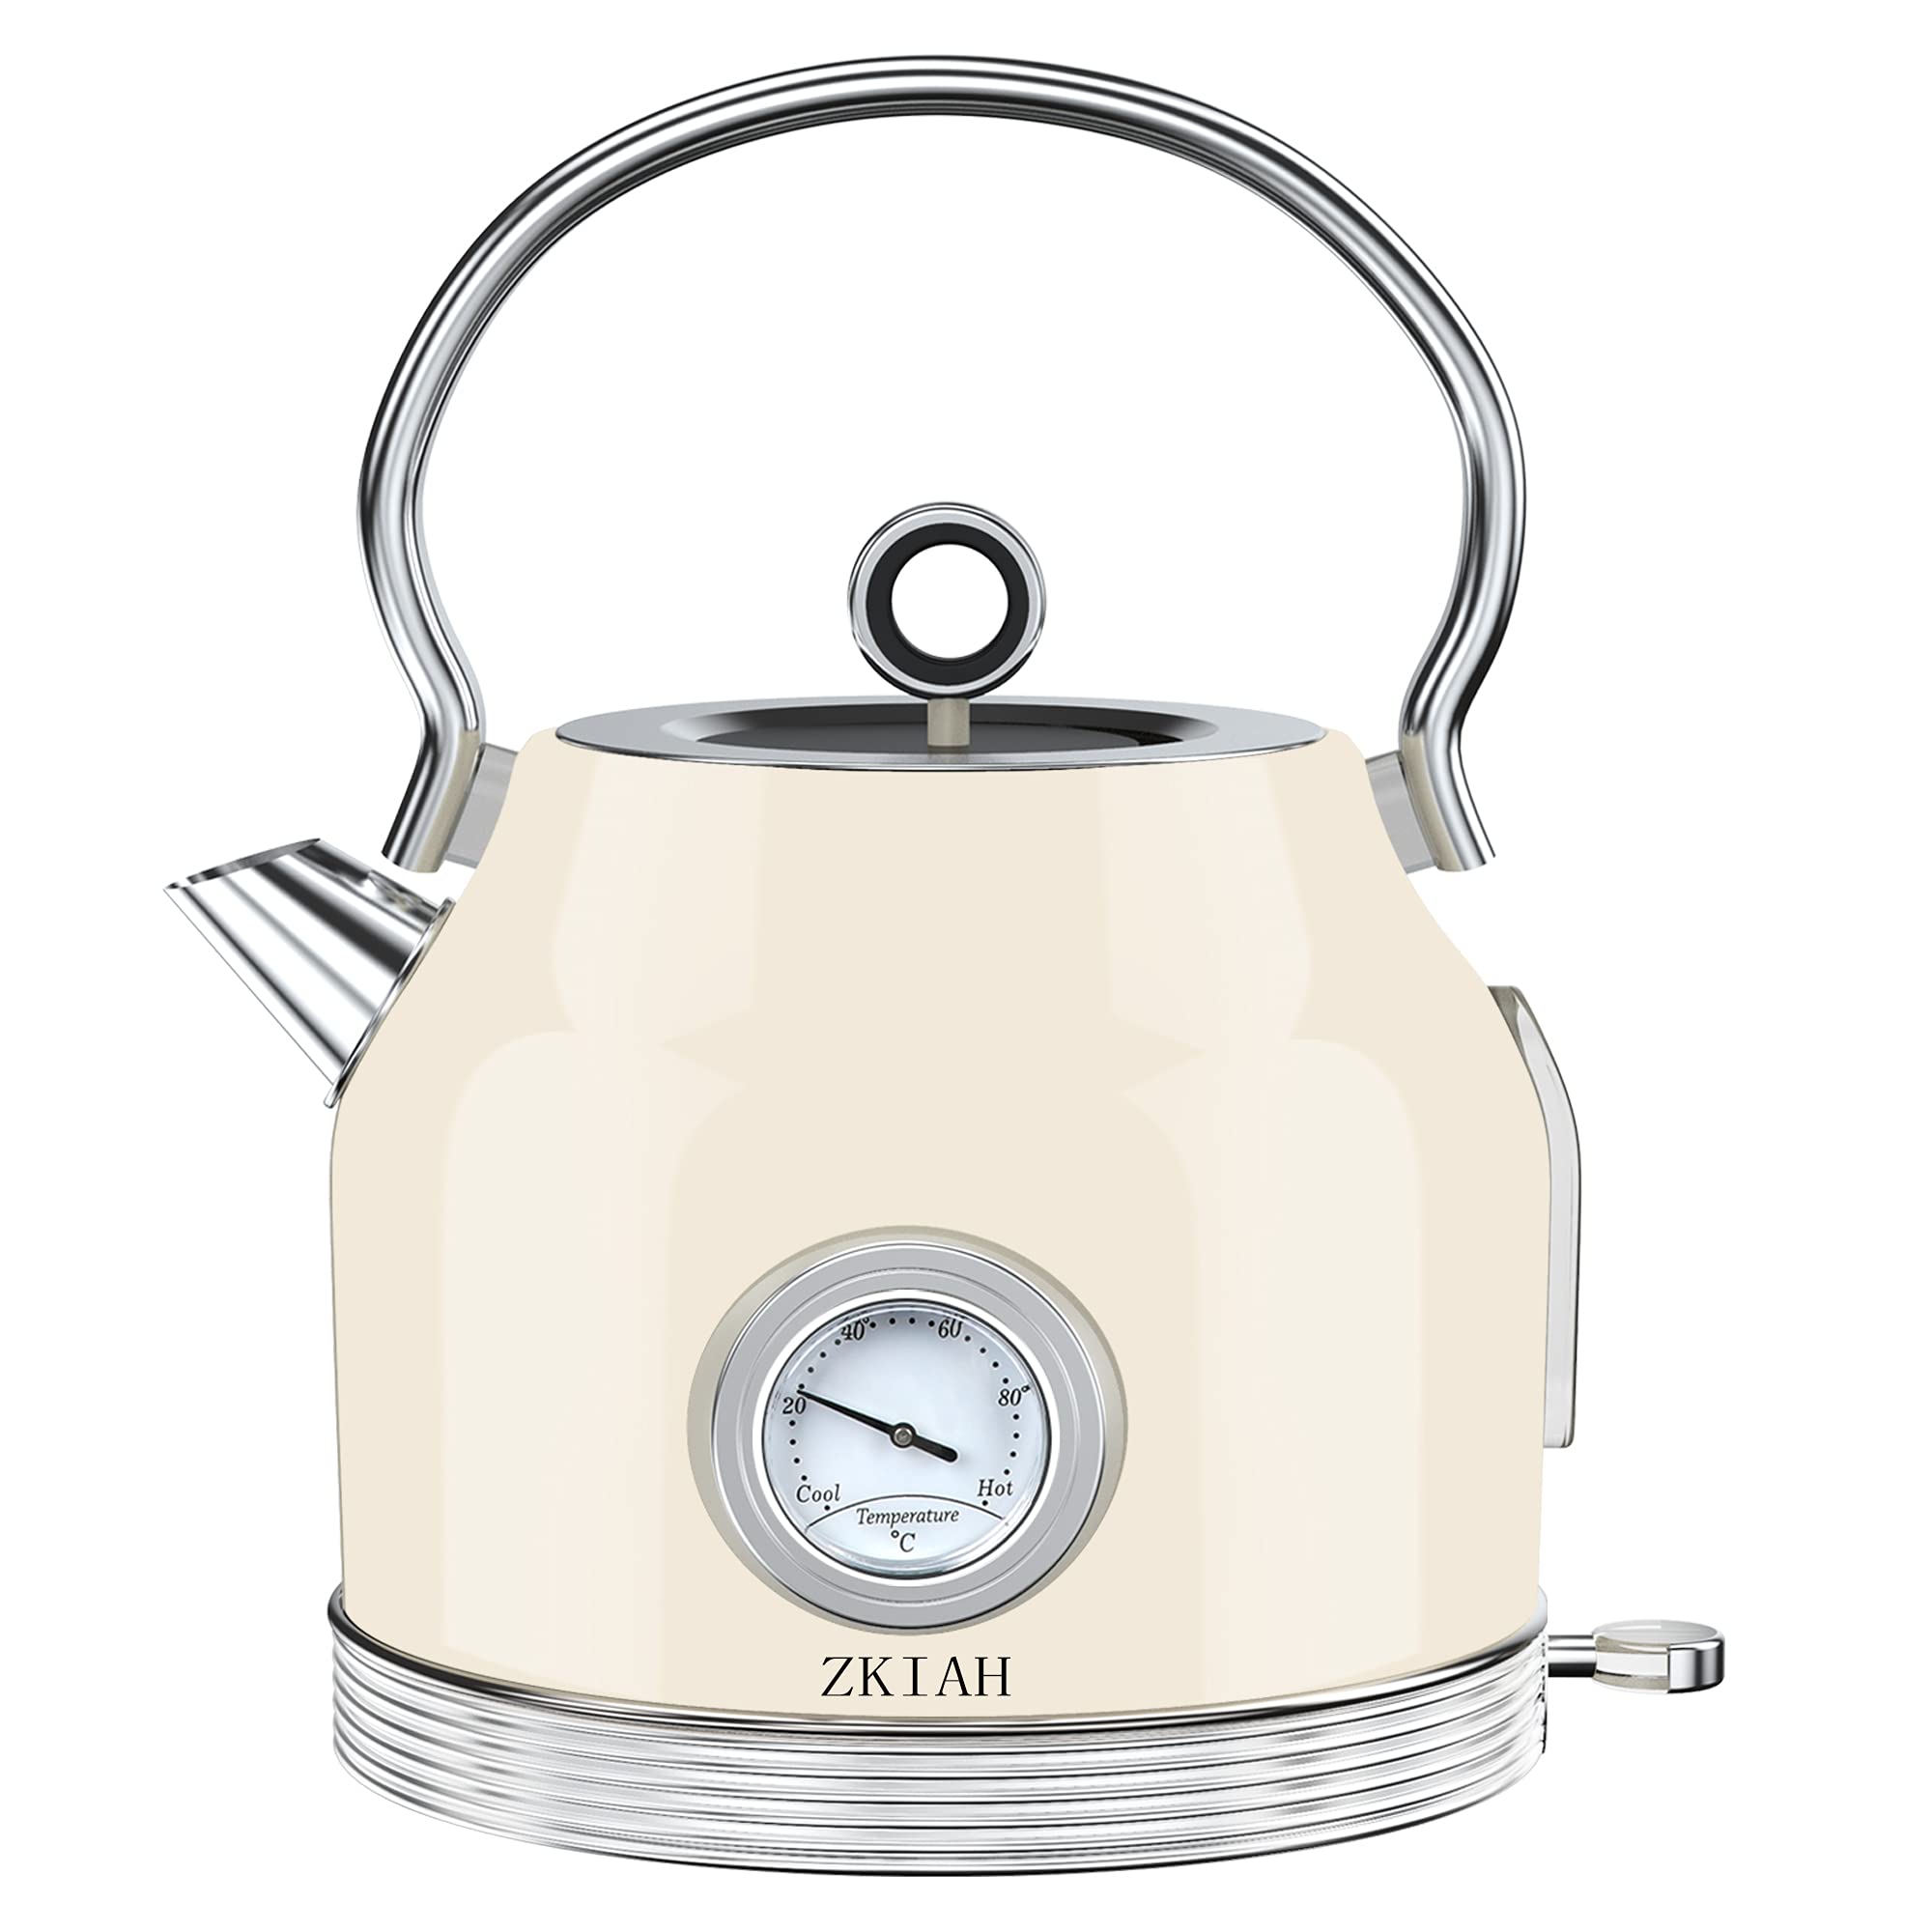 ZKIAH Electric Kettle 1.7L Stainless Steel, Vintage Fast Boiler Tea Kettle Water Heater with Temperature Dial, Boil-Dry Protection Automatic Shut-o...